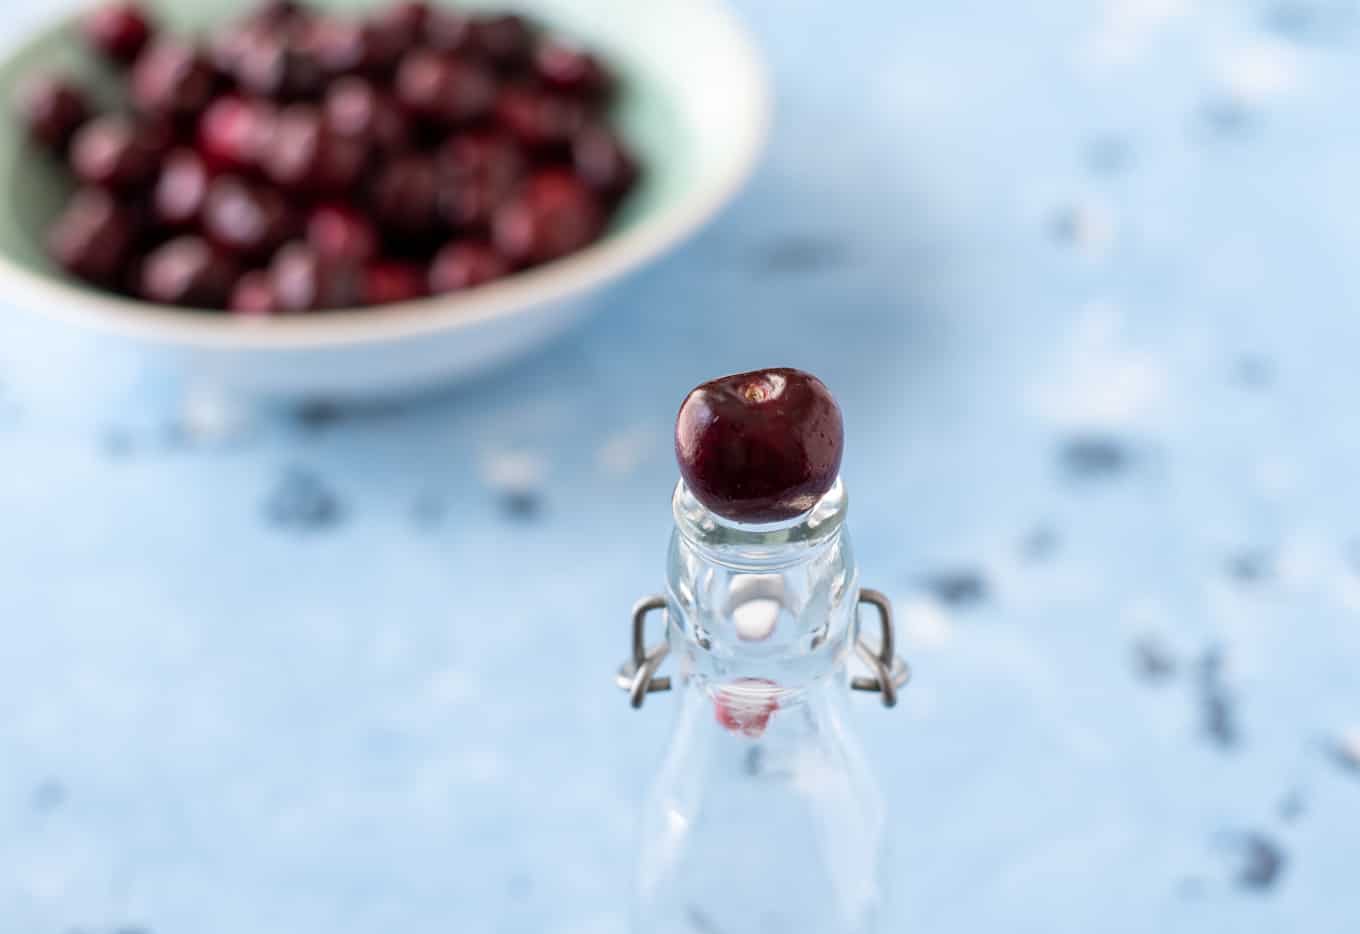 A cherry resting on a bottle top.